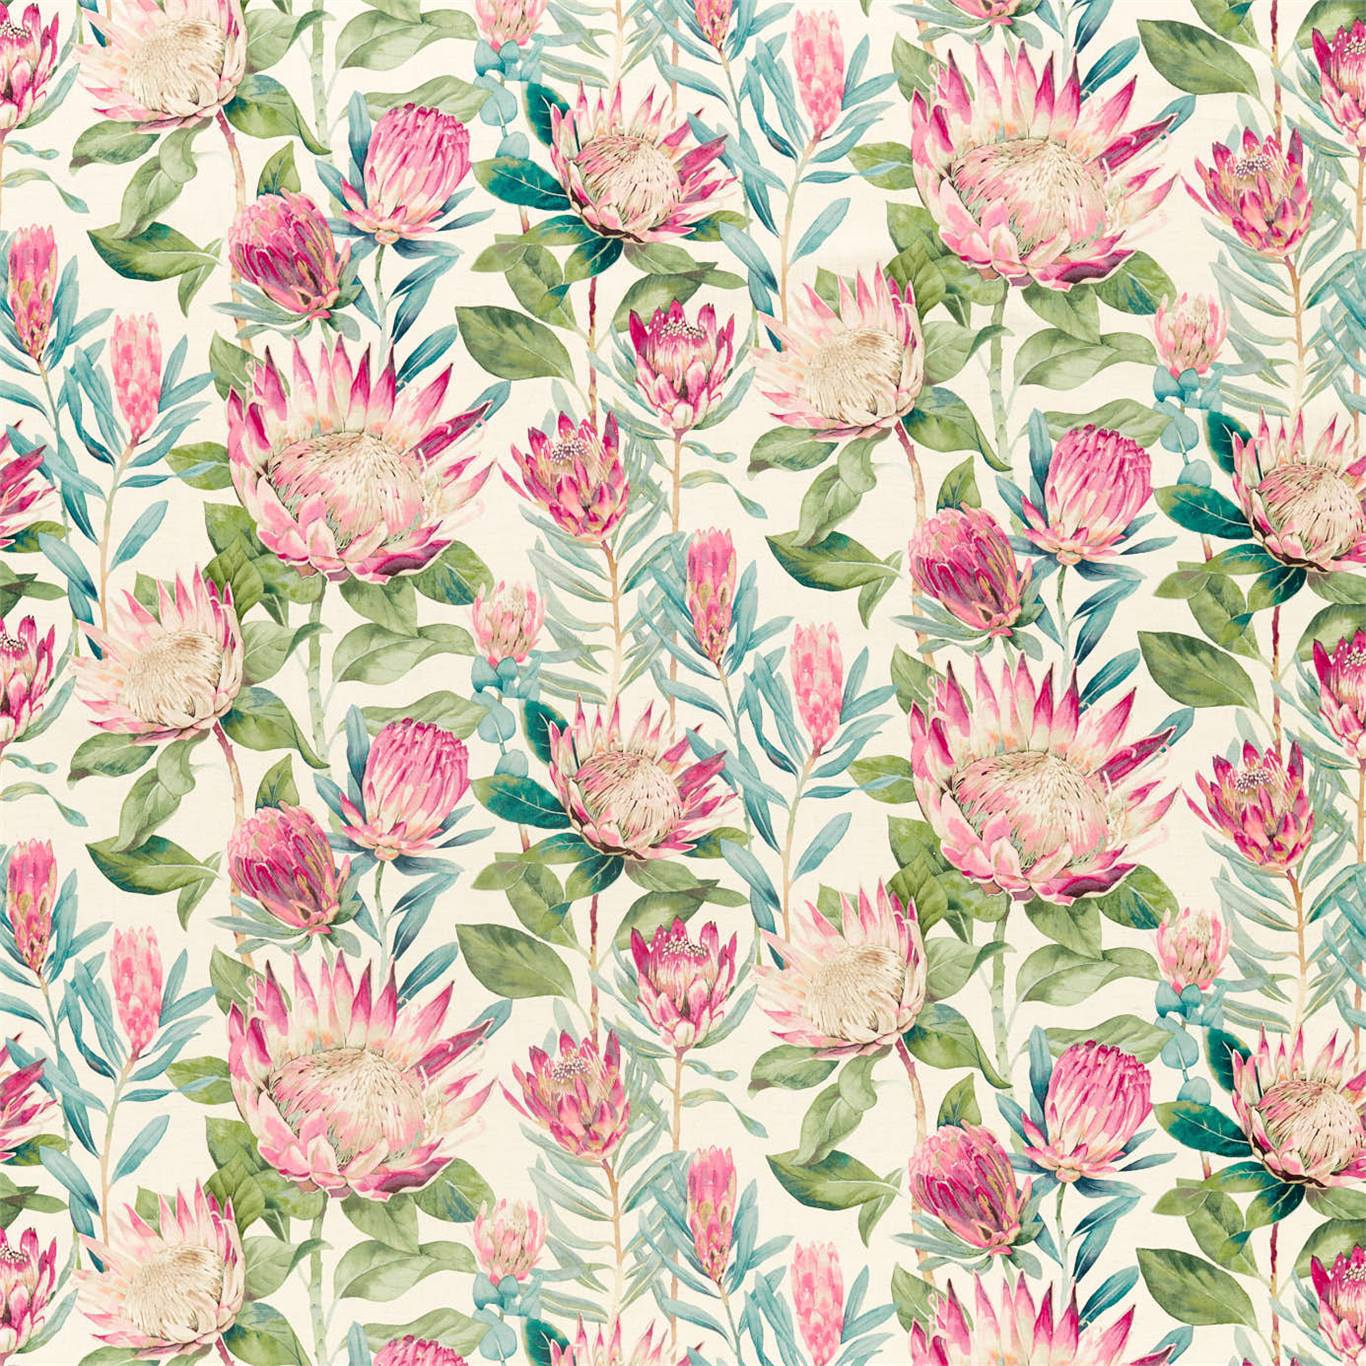 King Protea Fabric by Sanderson